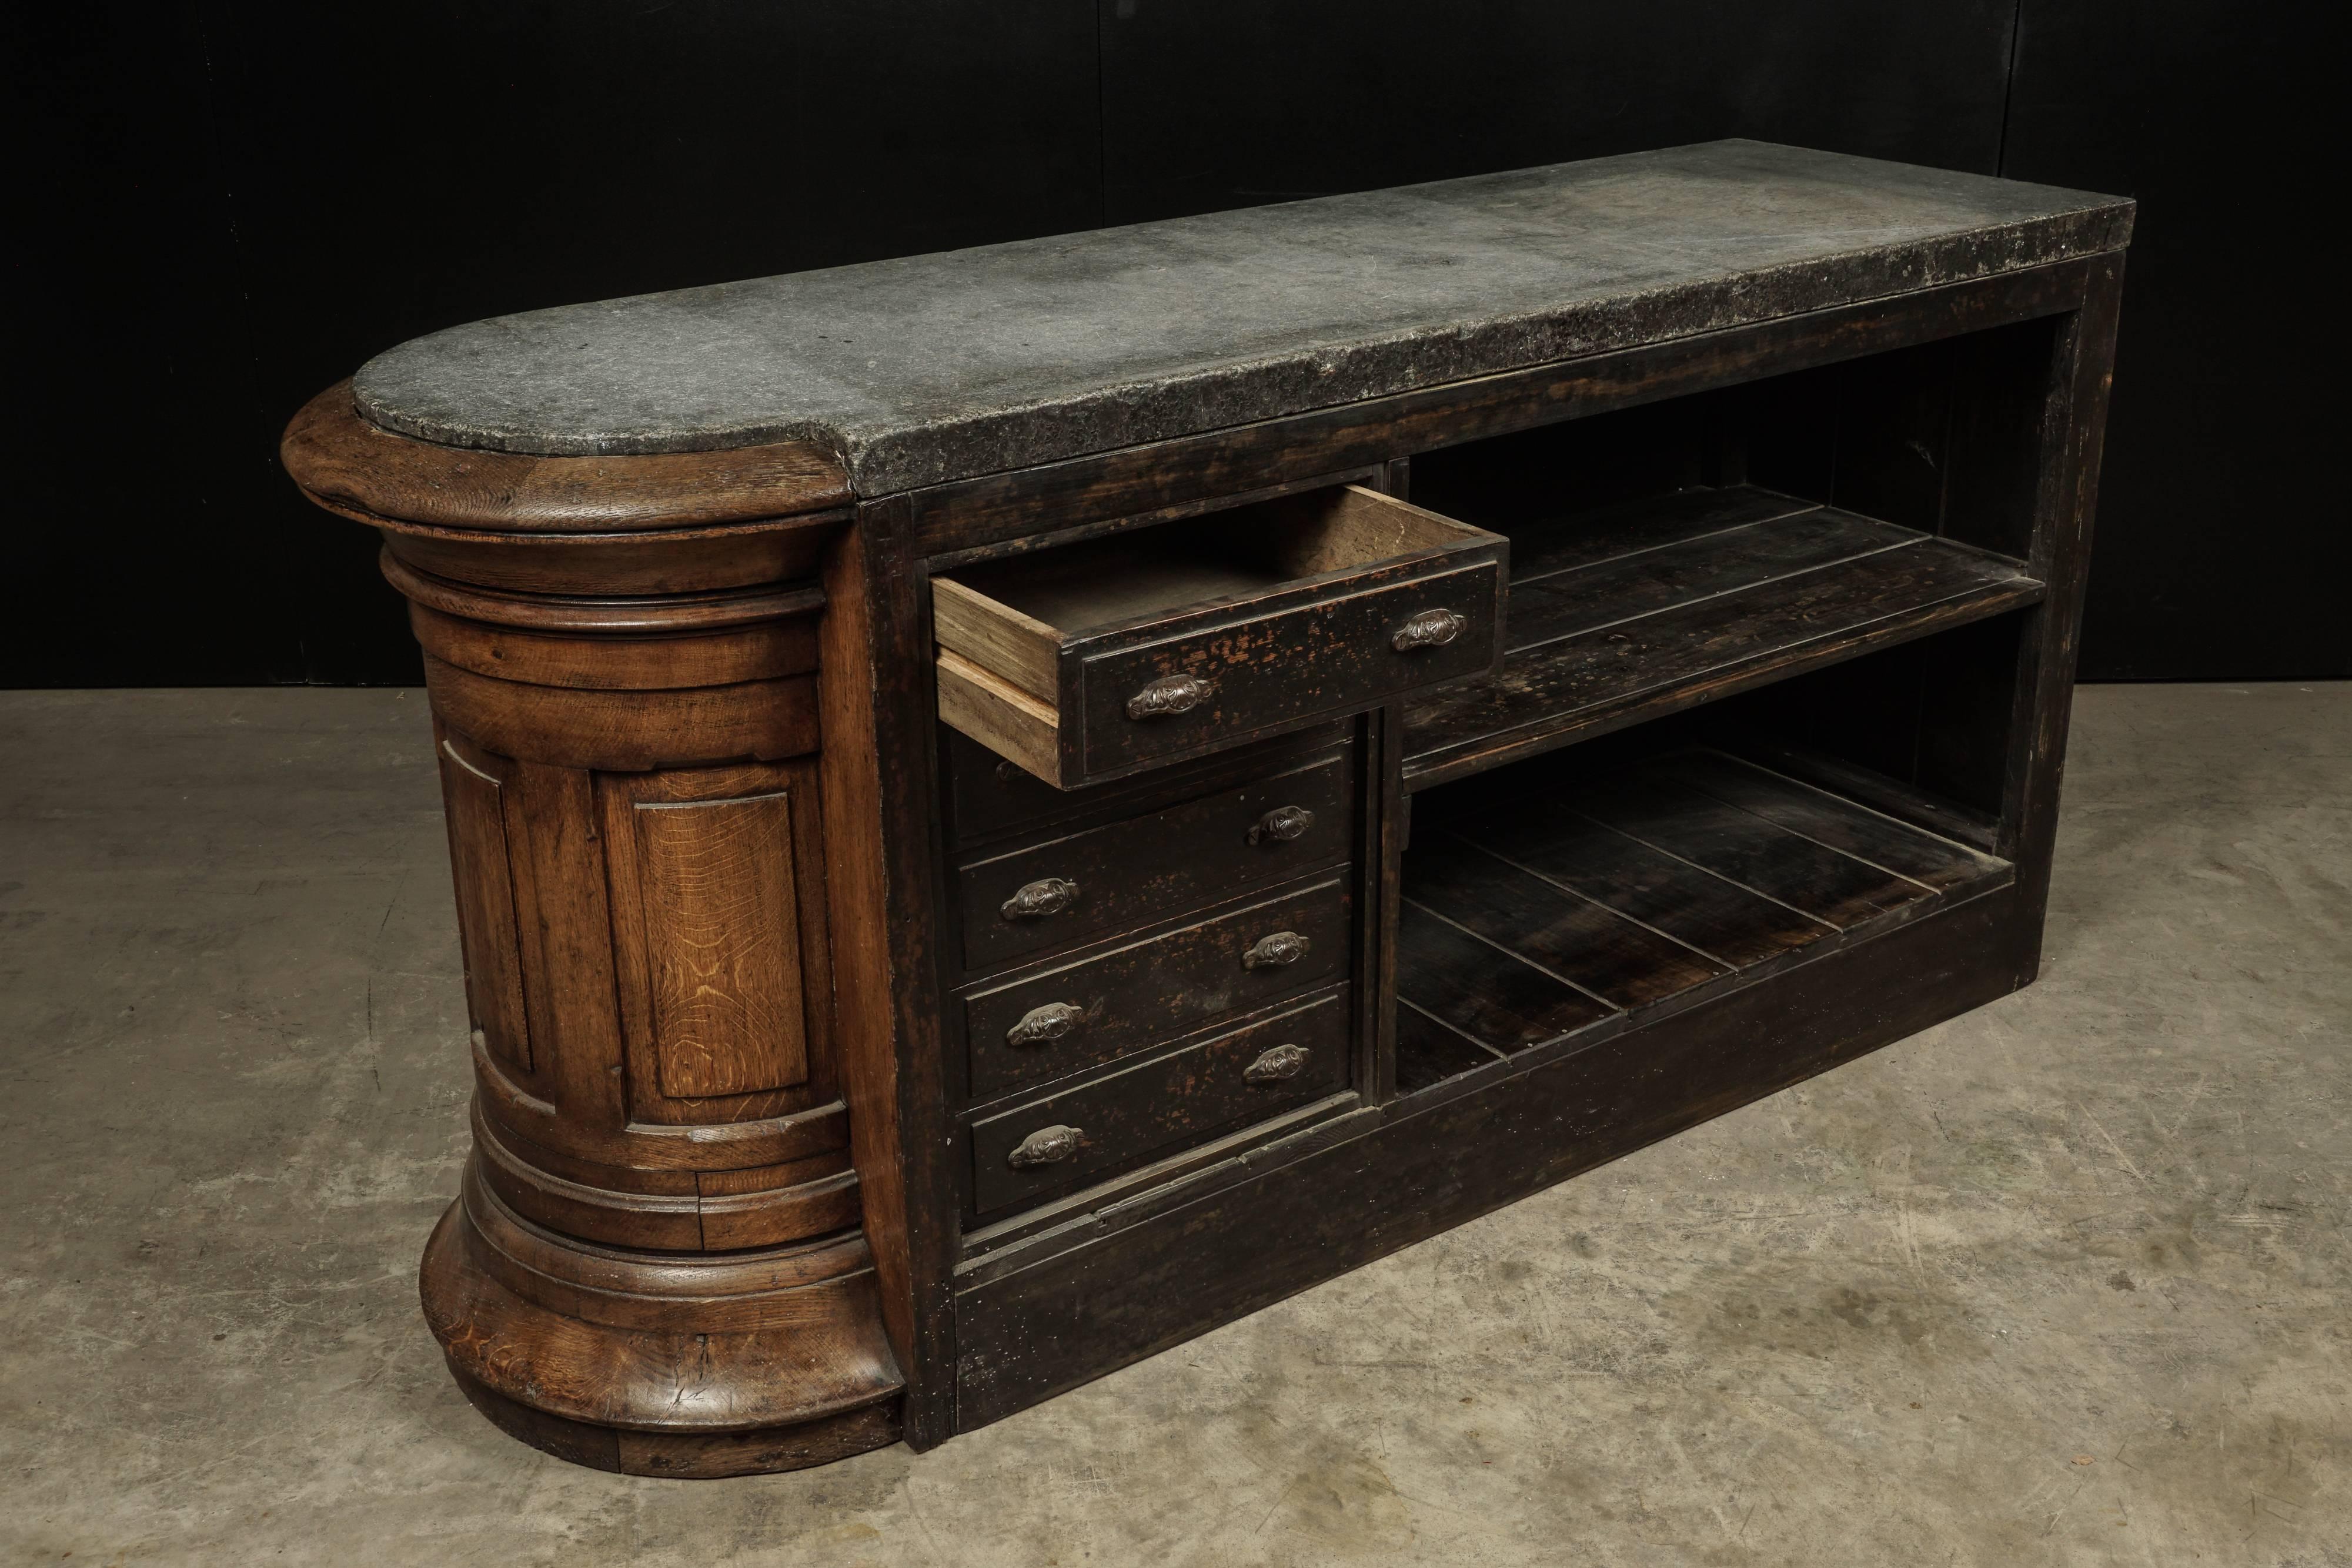 Early 20th Century Rare Shop Counter with Original Soapstone Top from France, circa 1900